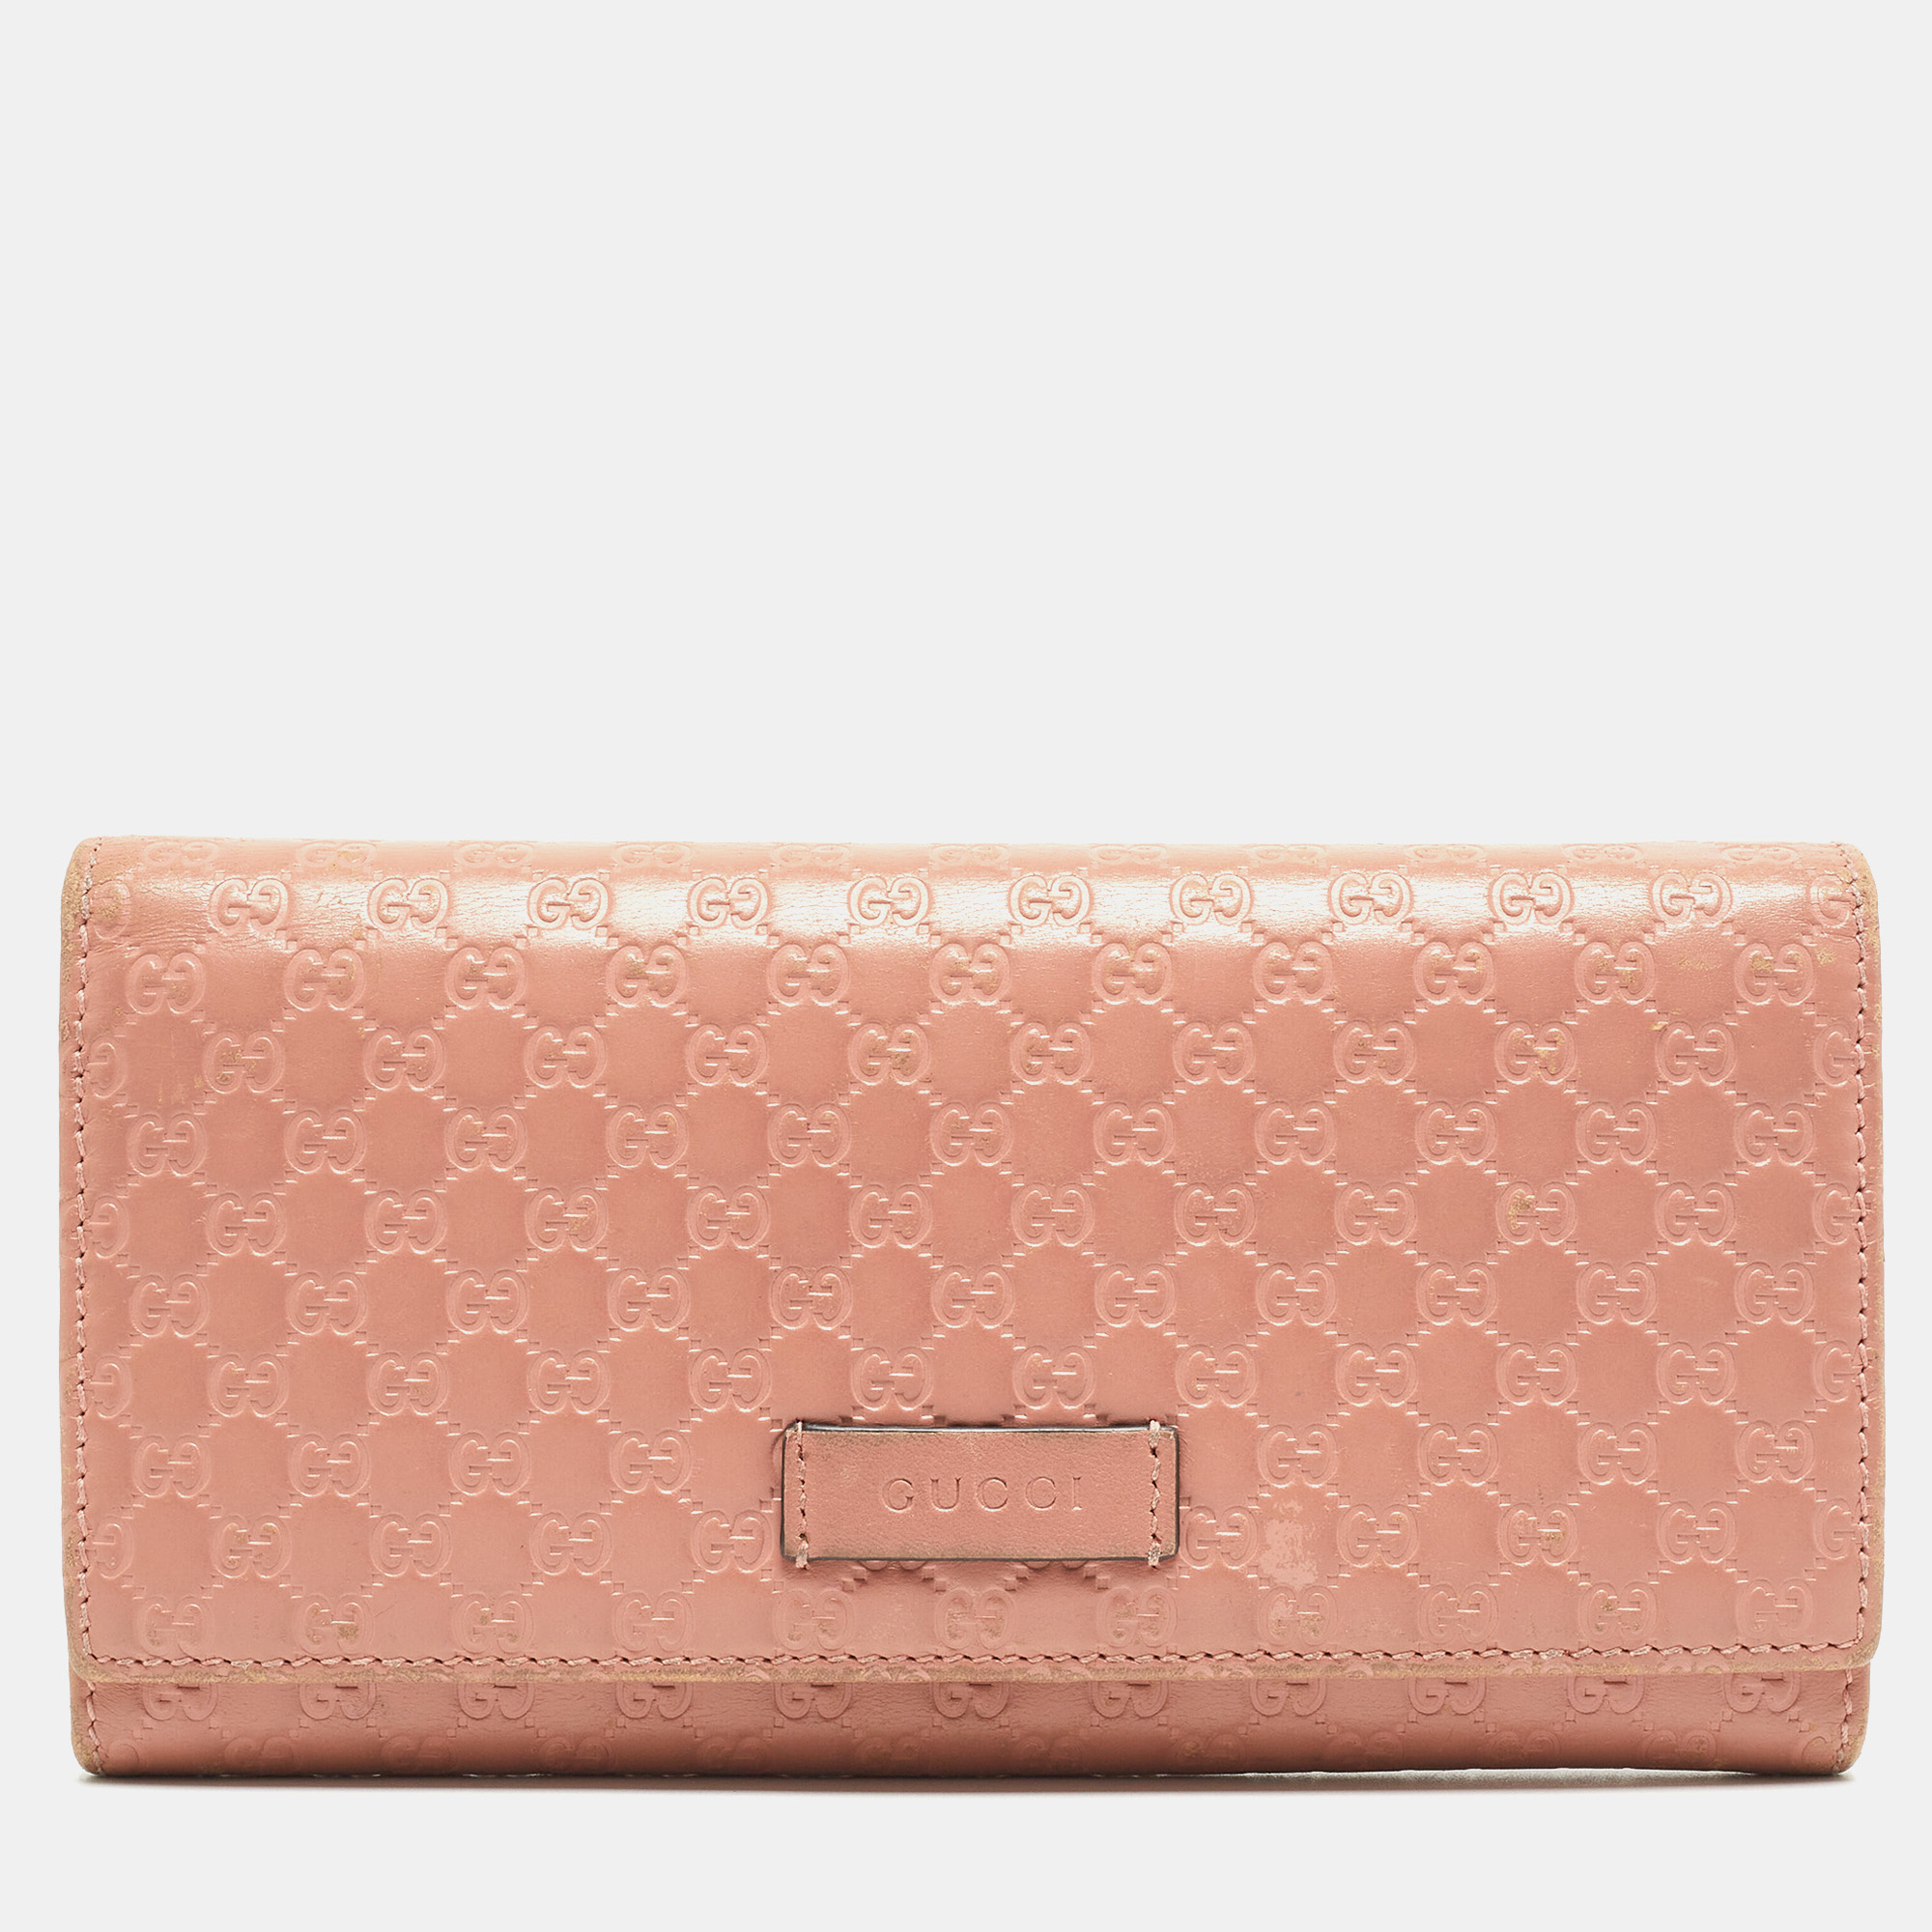 Gucci pink microgucissima leather flap continental wallet